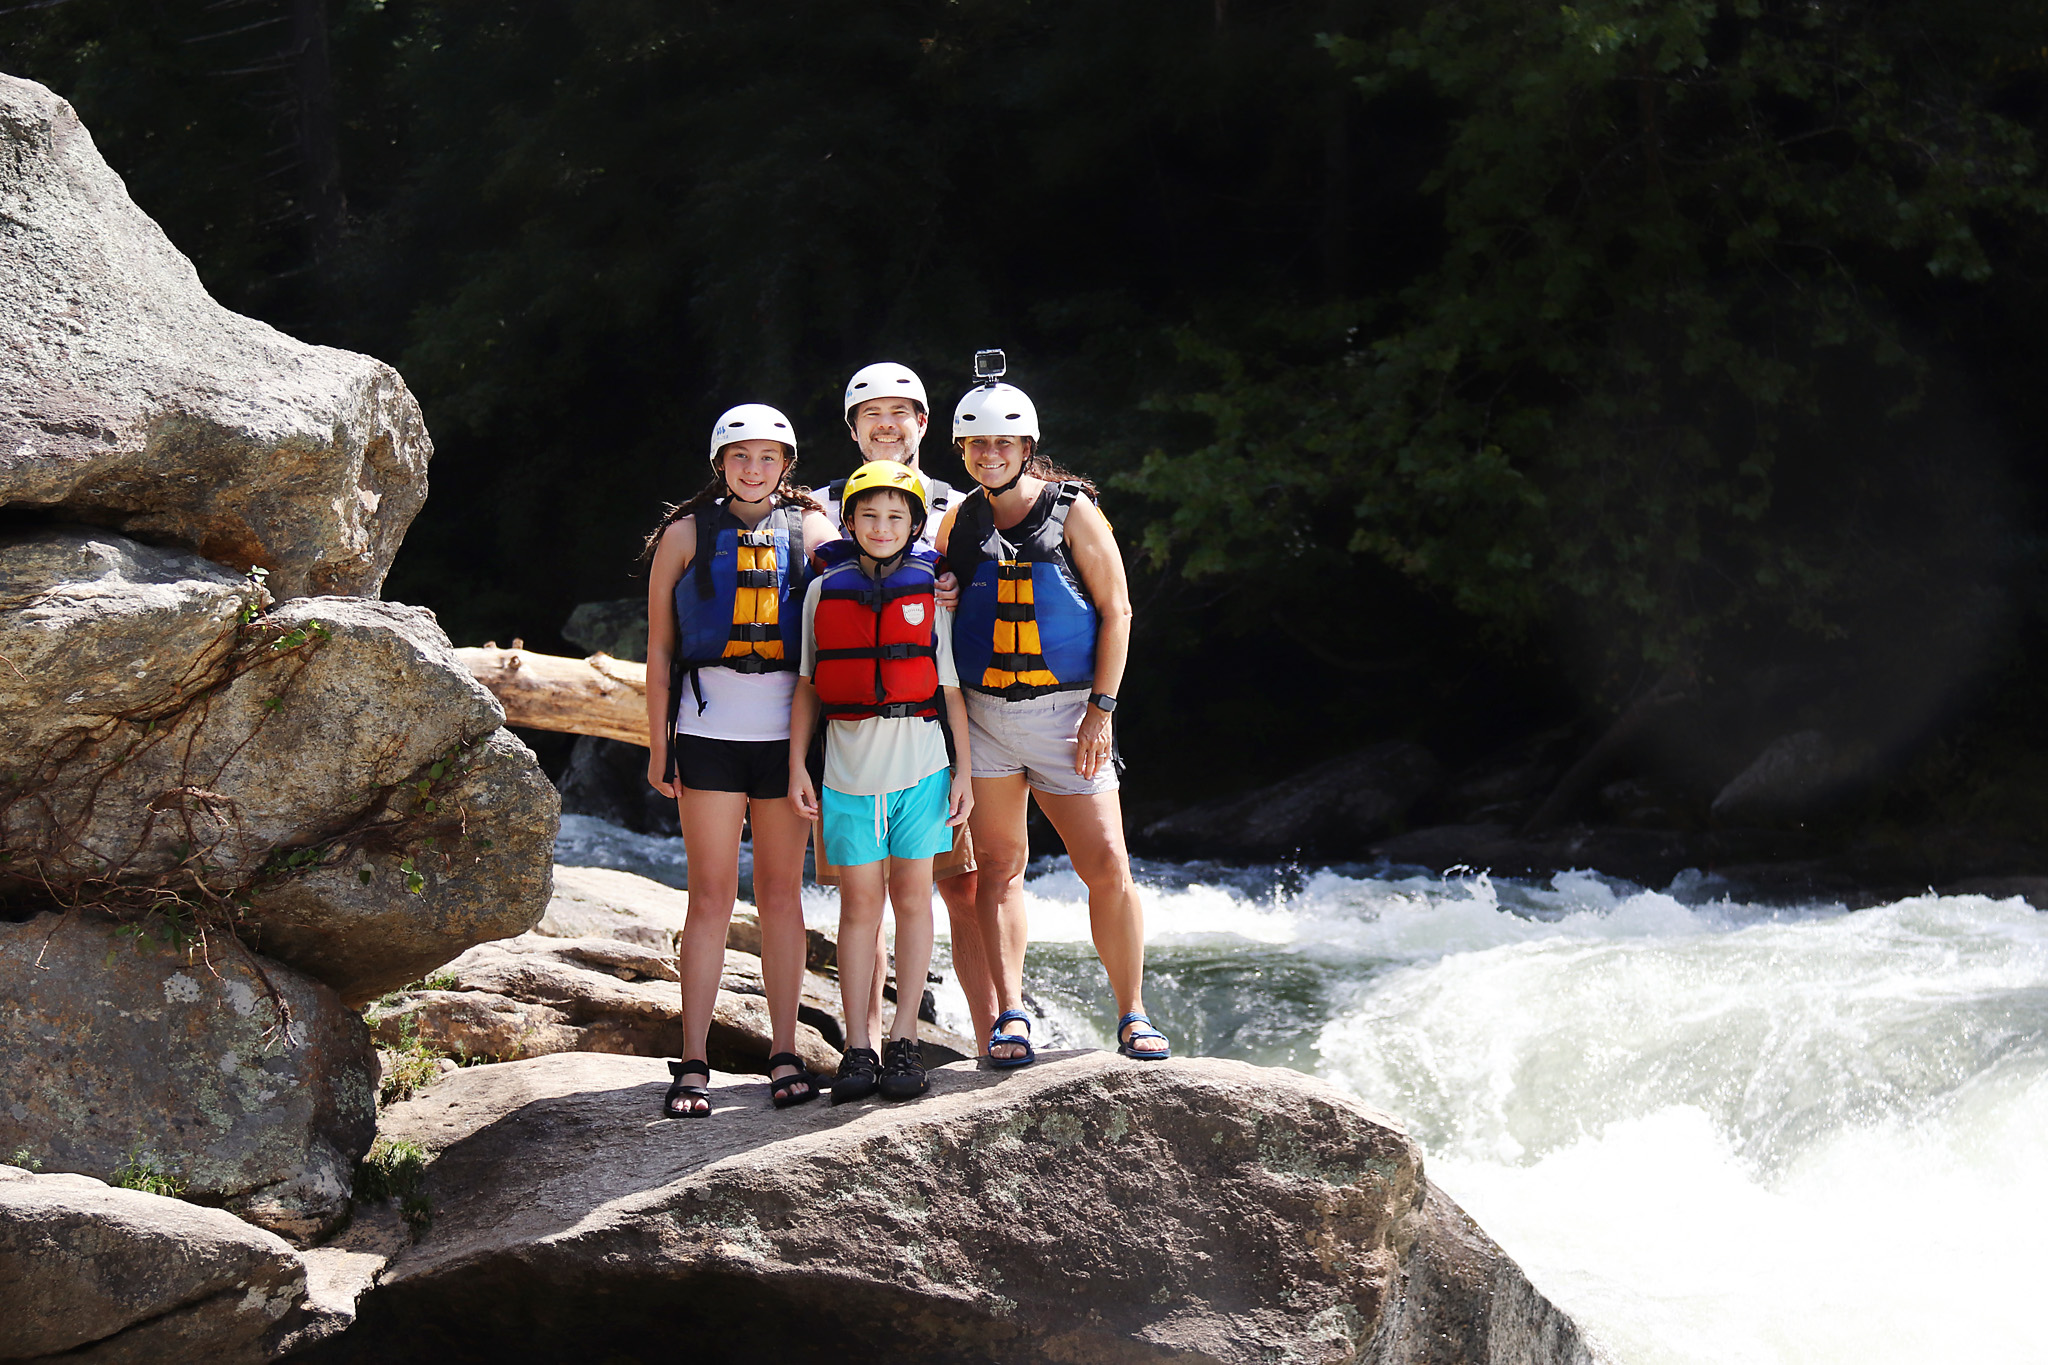 https://ourlittlelifestyle.com/wp-content/uploads/2021/09/Wildwater-Rafting13.jpg